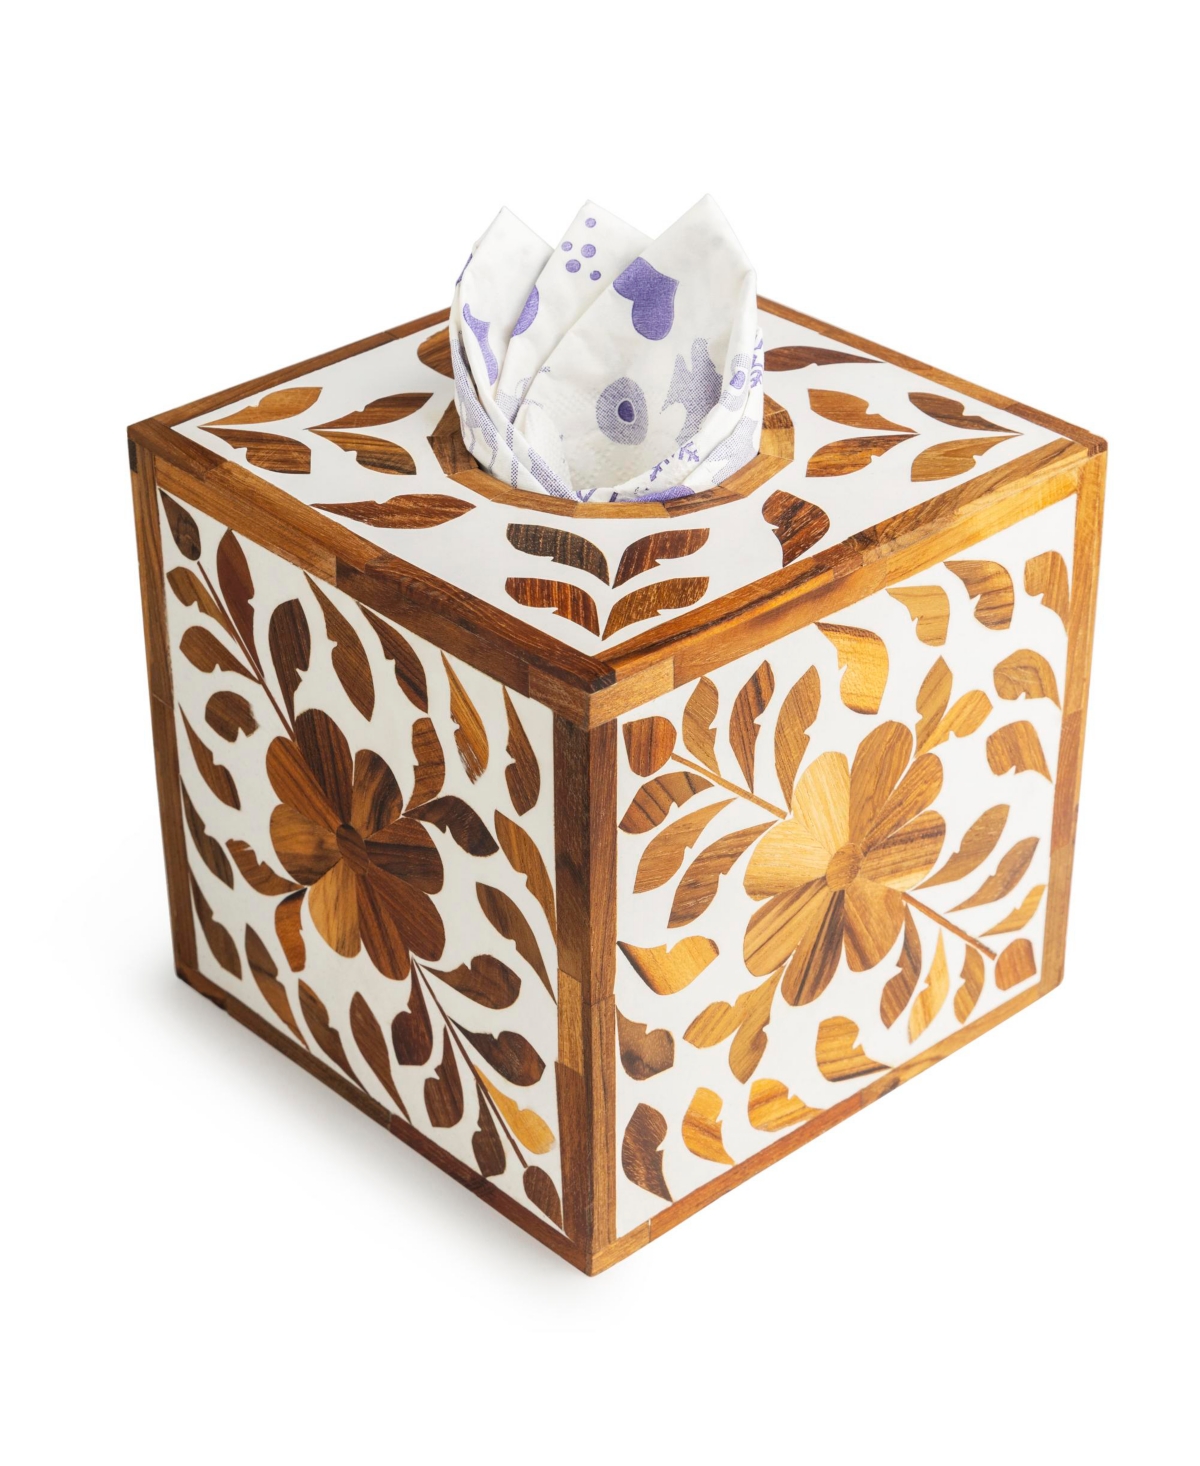 Jodhpur Wood Inlay Tissue Box Cover, Small - Open Miscellaneous